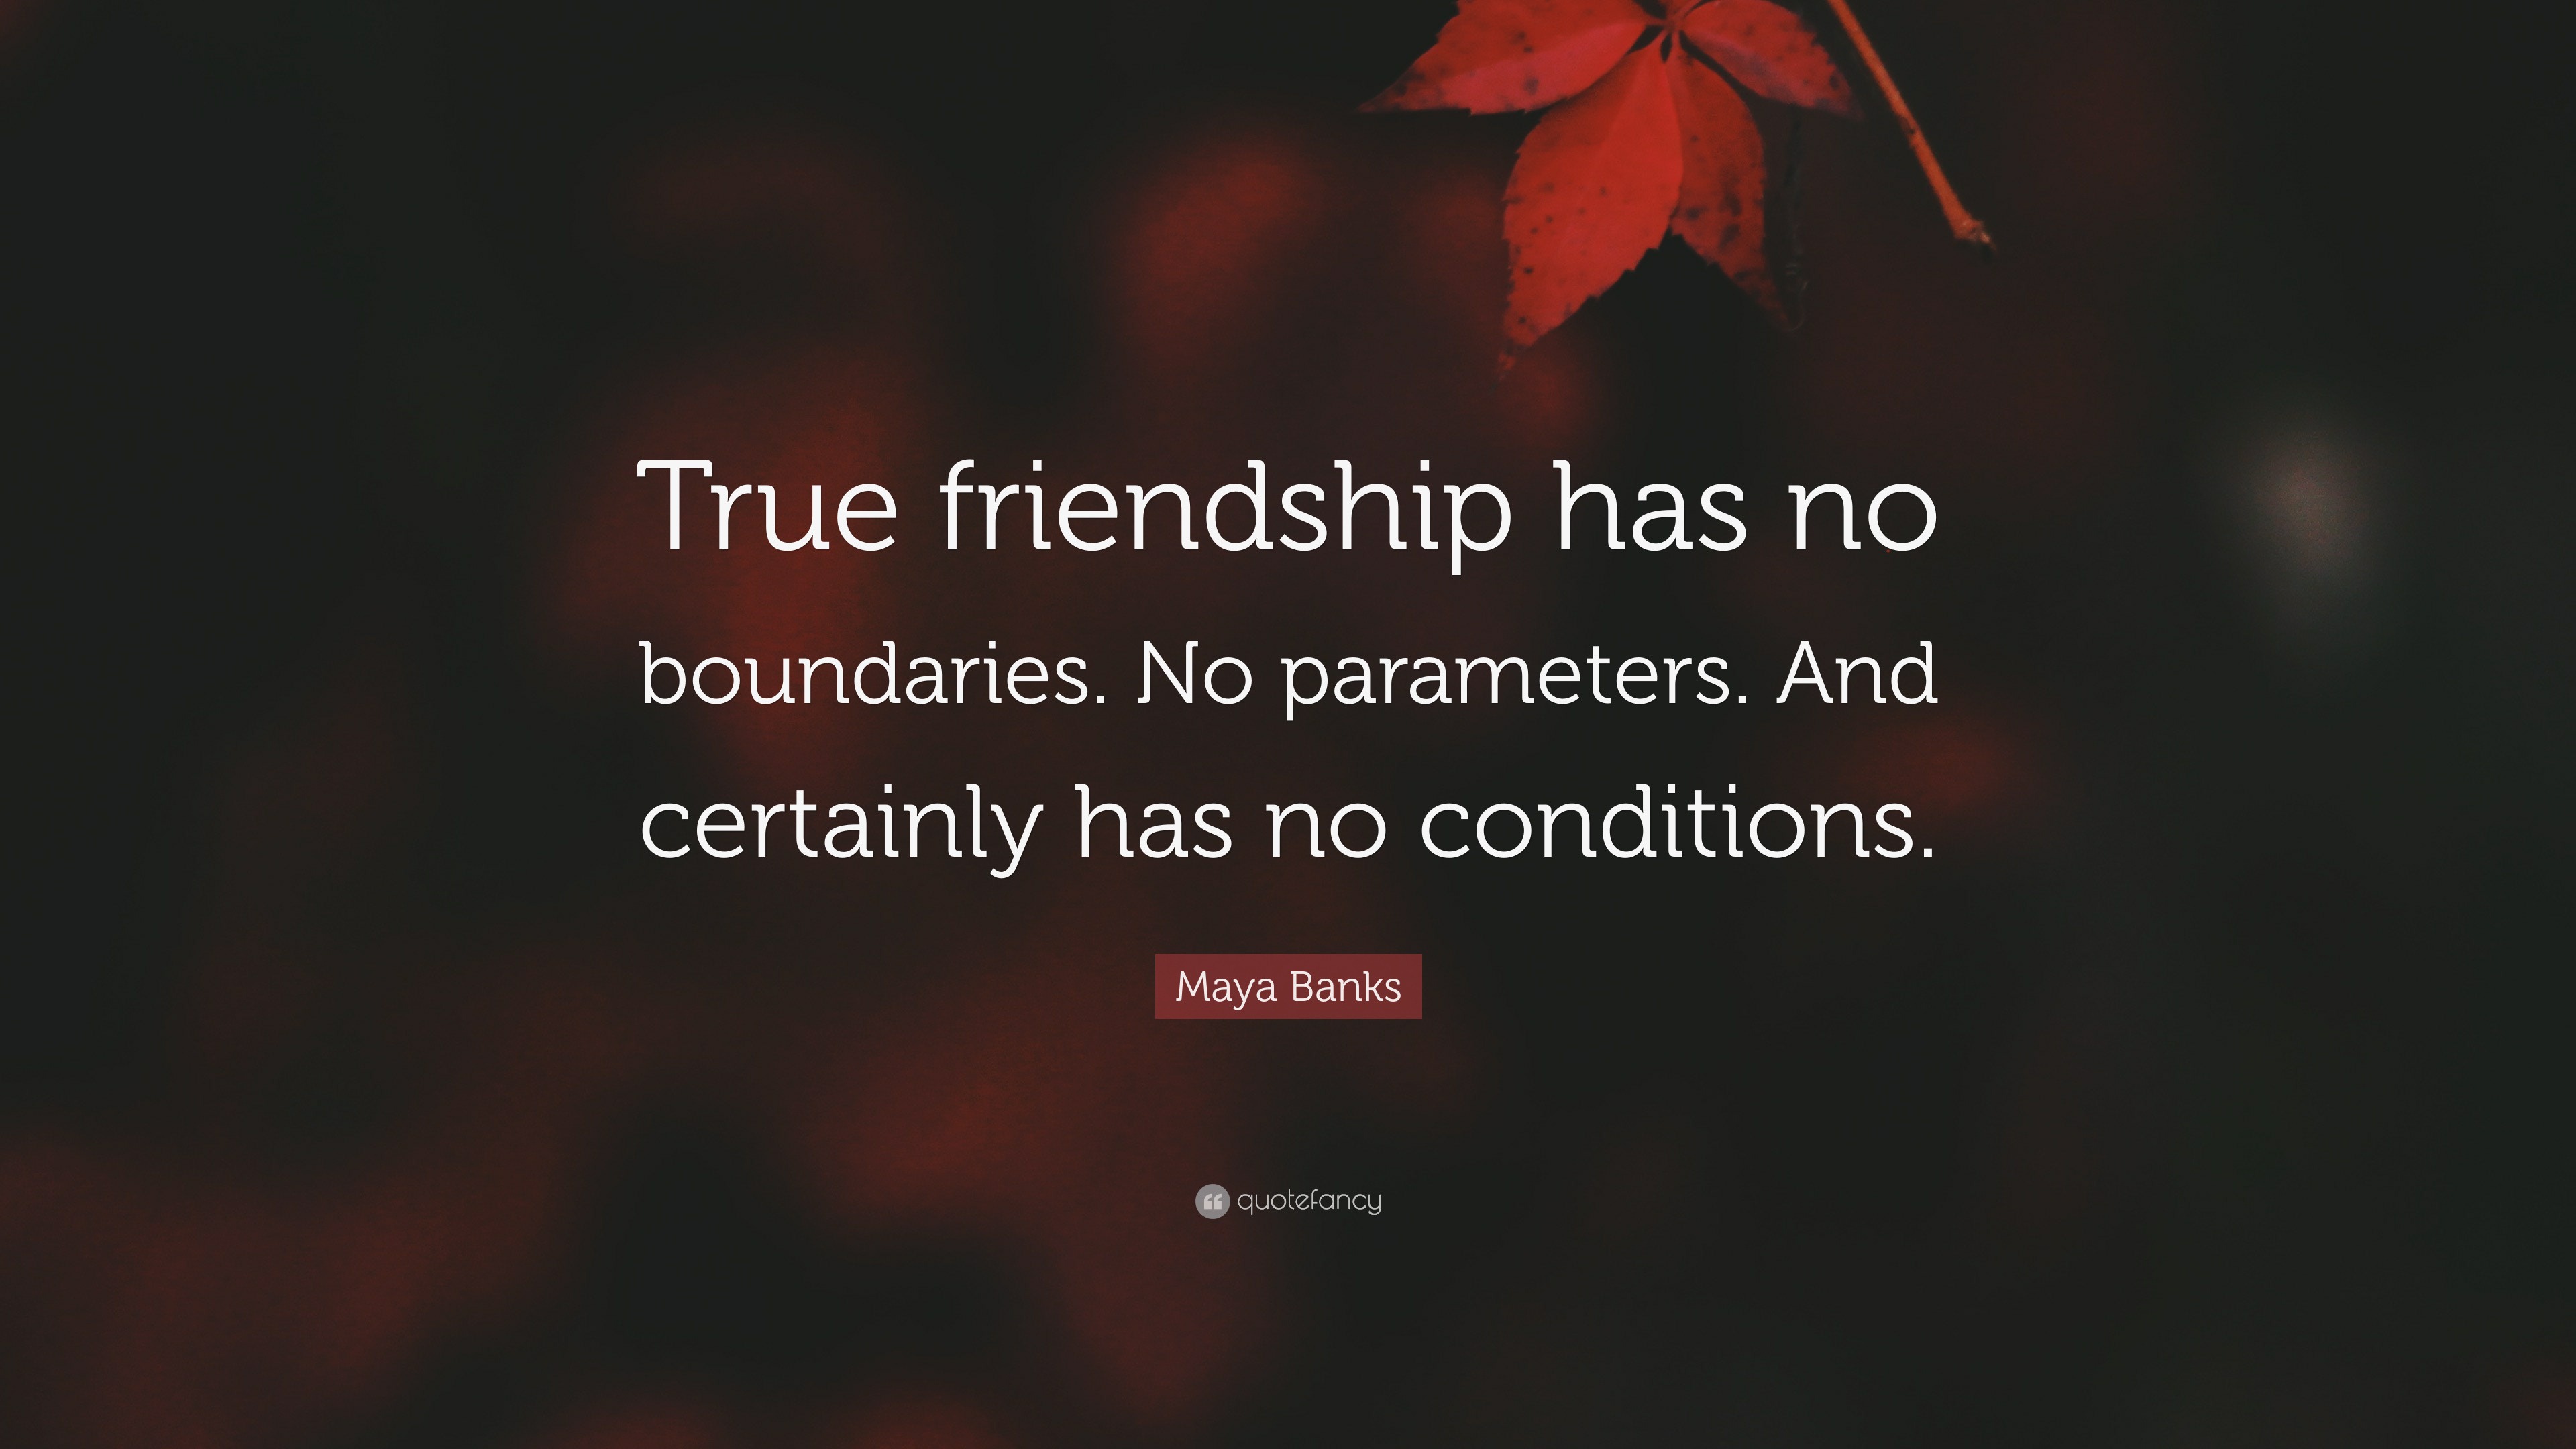 Maya Banks Quote: “True friendship has no boundaries. No parameters. And  certainly has no conditions.”